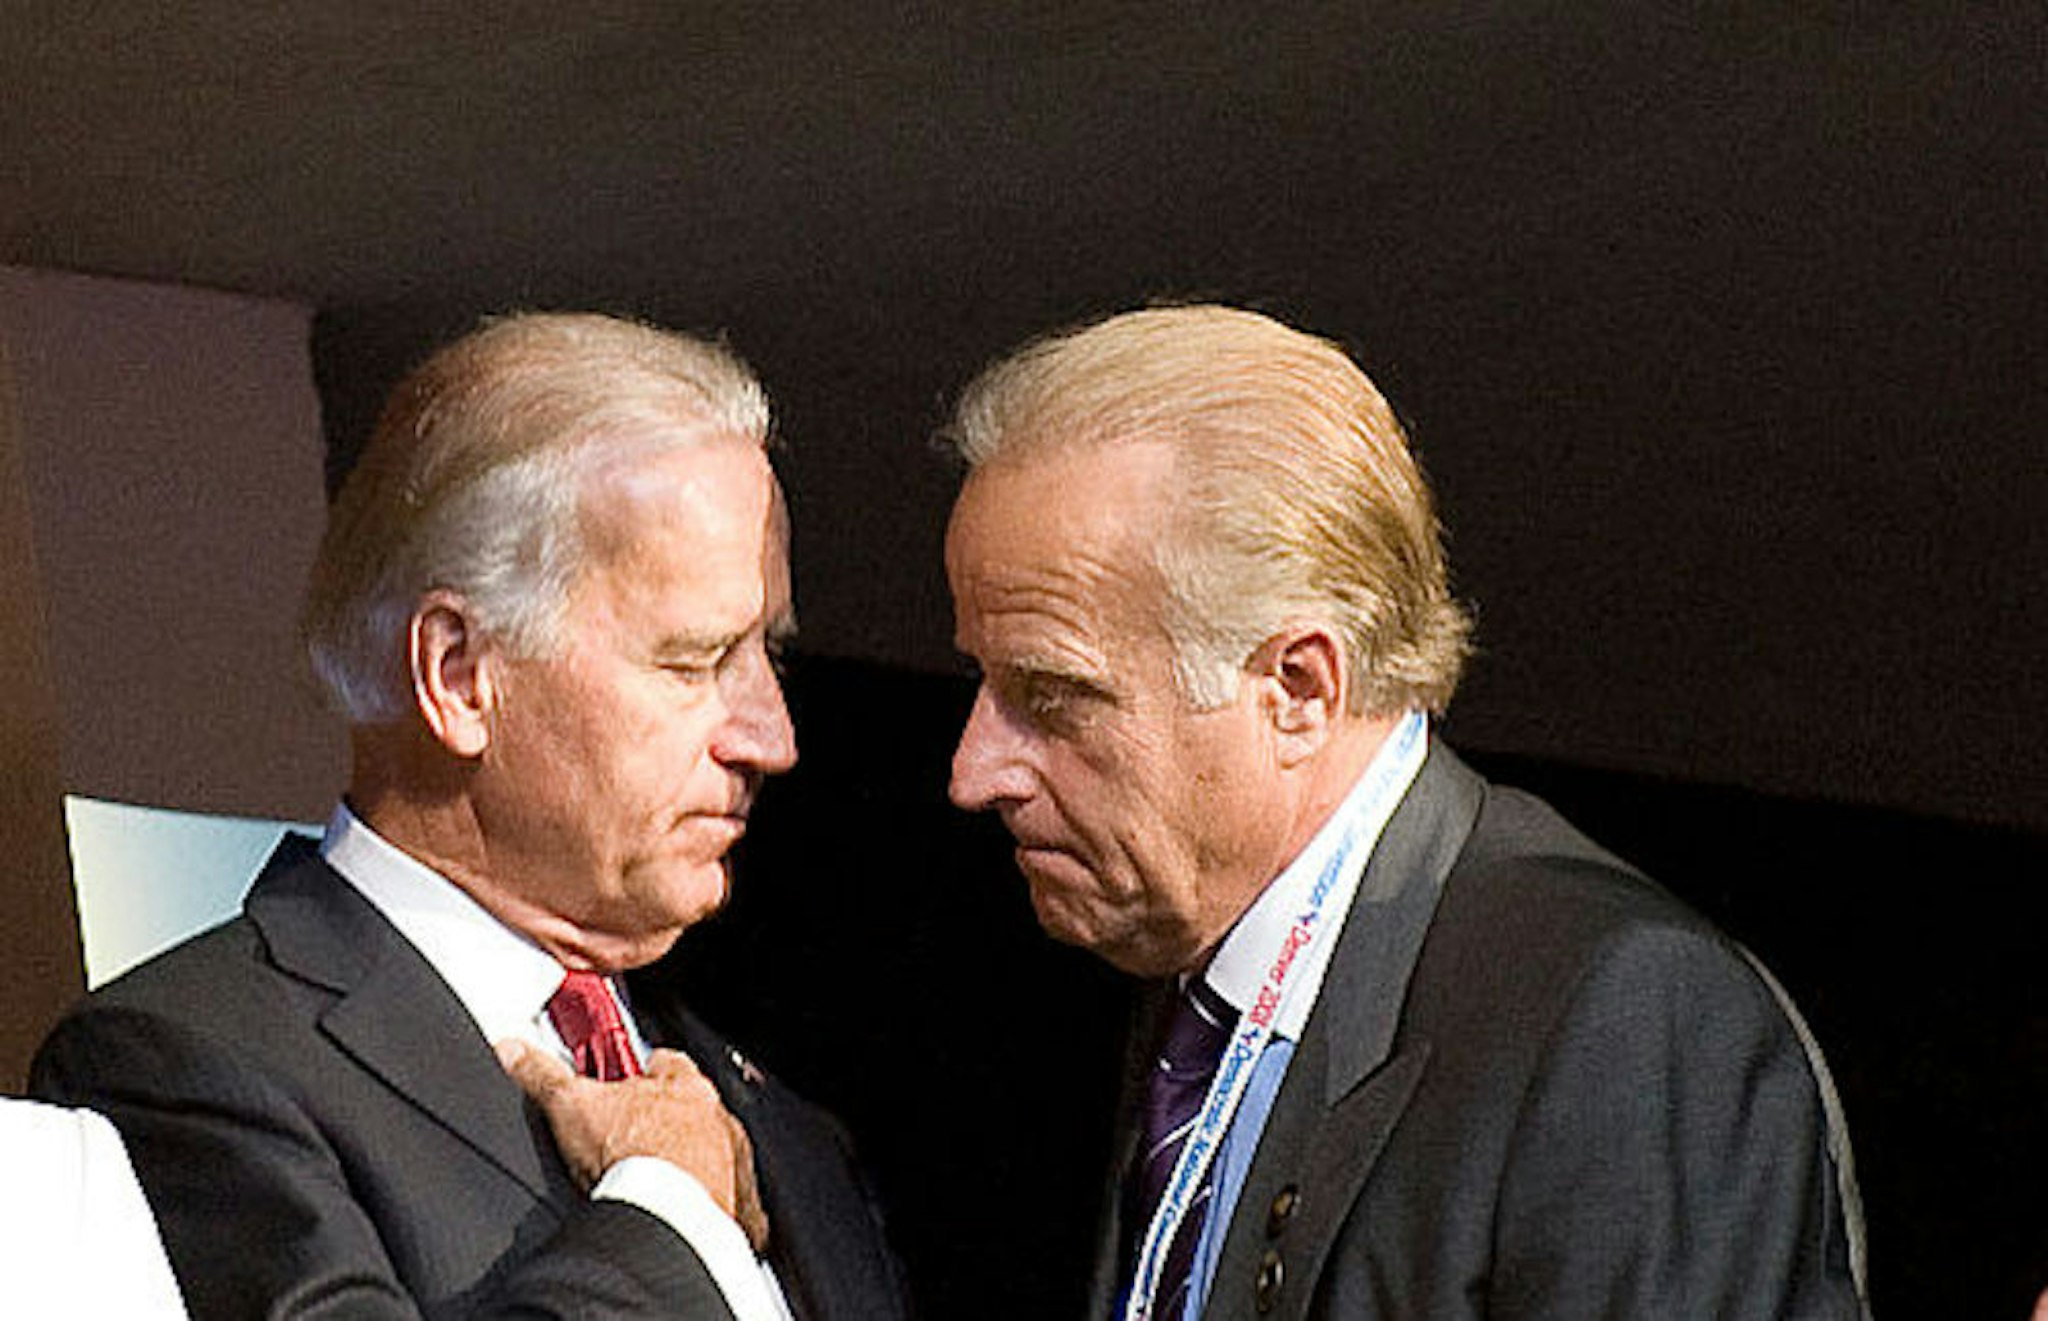 Democratic Vice Presidential candidate Joe Biden (L) and his brother James Biden during the Democratic National Convention in Denver. (Photo by Rick Friedman/Corbis via Getty Images)